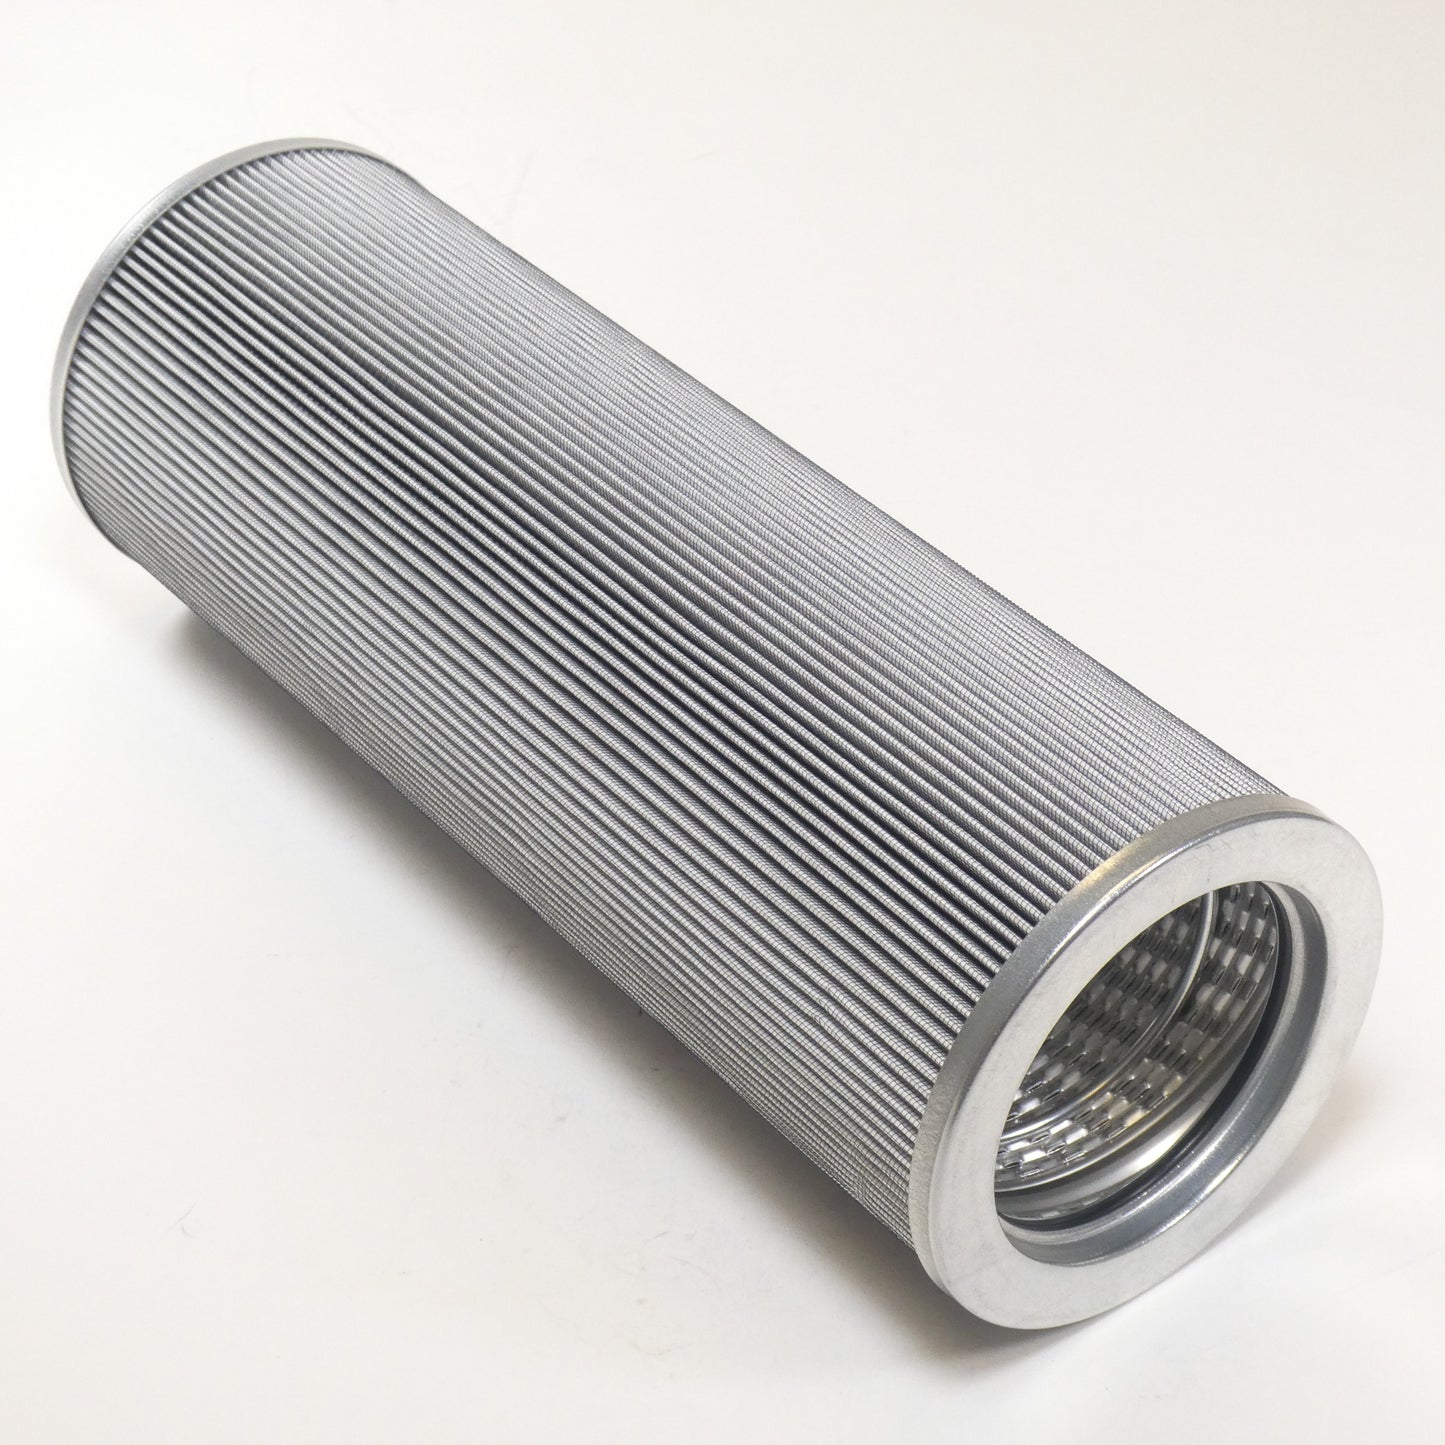 Hydrafil Replacement Filter Element for Diagnetics LPG516V03